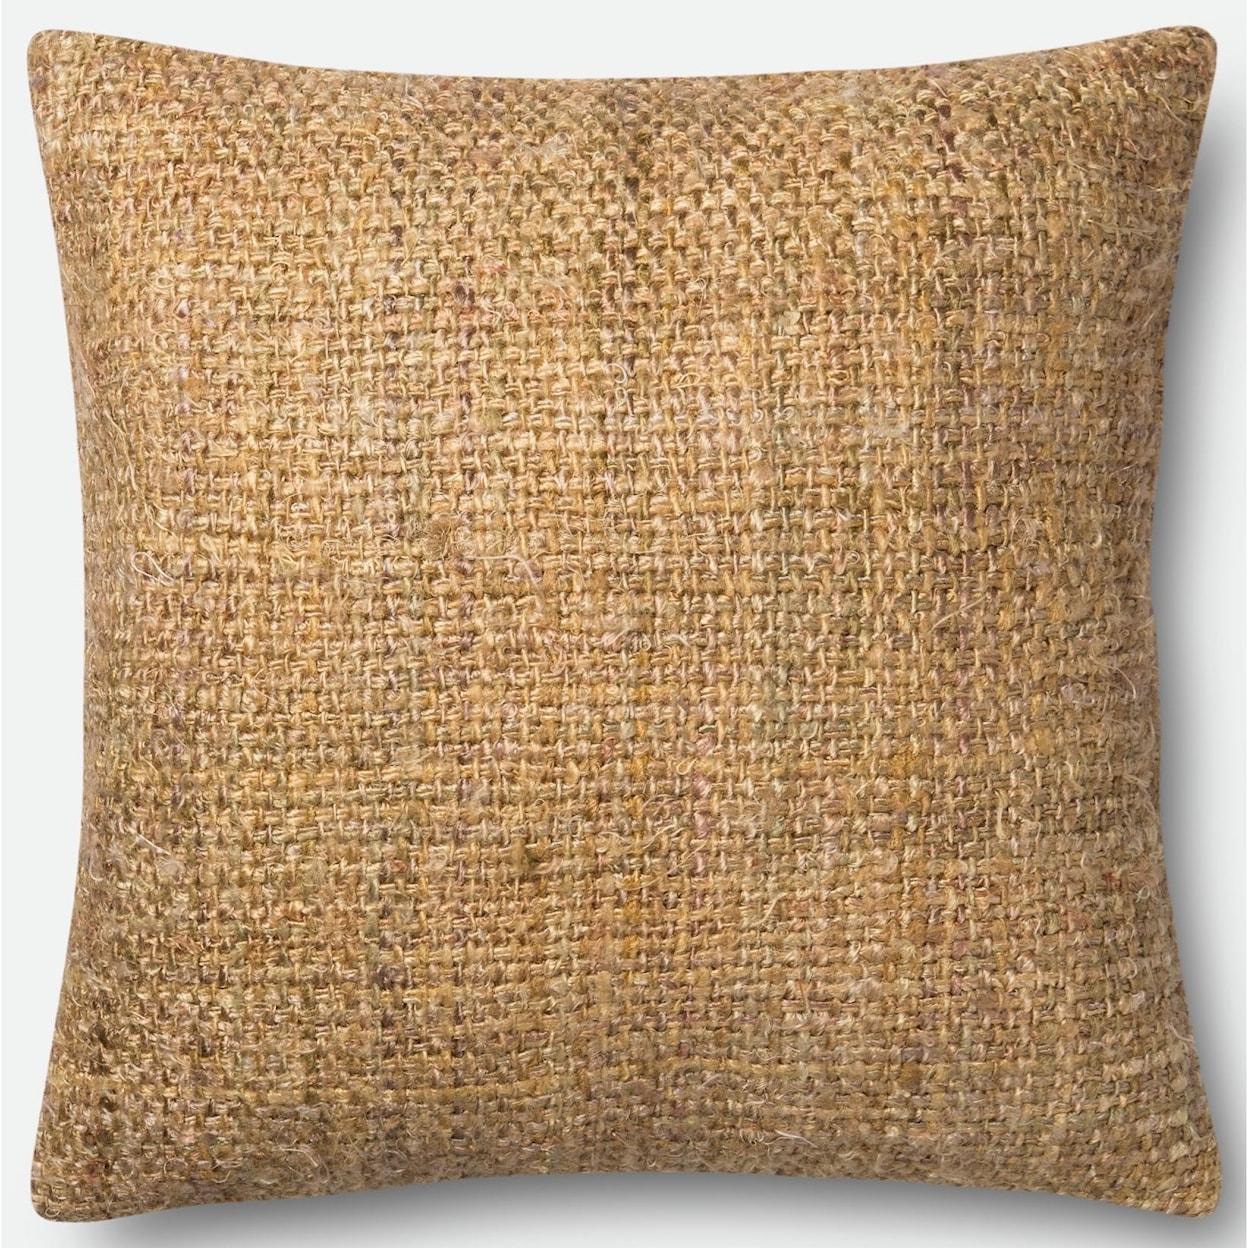 Magnolia Home by Joanna Gaines for Loloi Accent Pillows 22" X 22" Cover w/Down Pillow